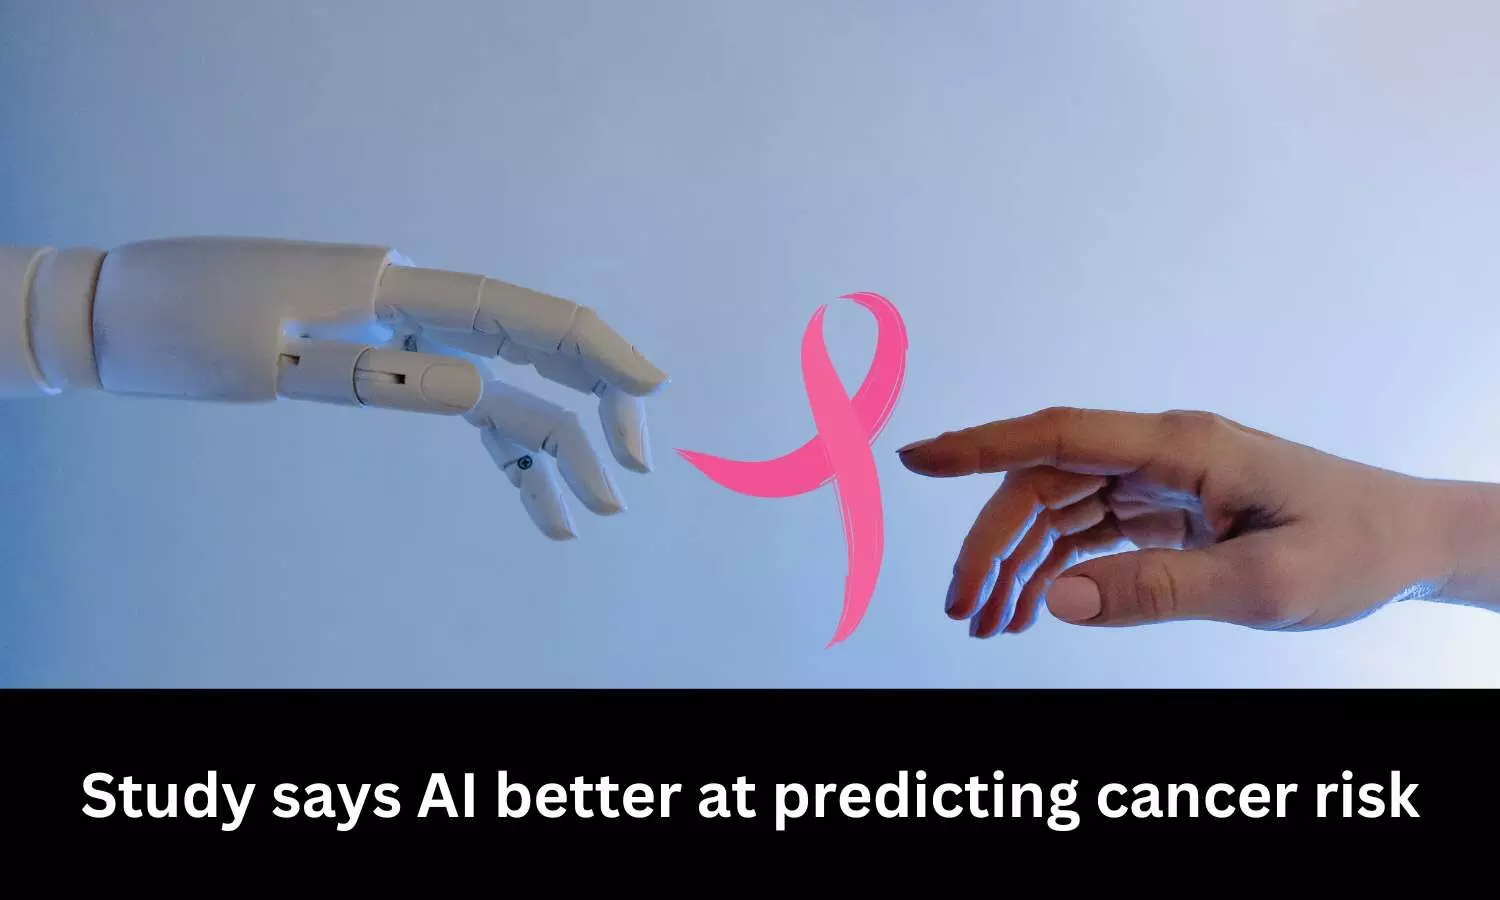 AI better at predicting cancer risk: Study